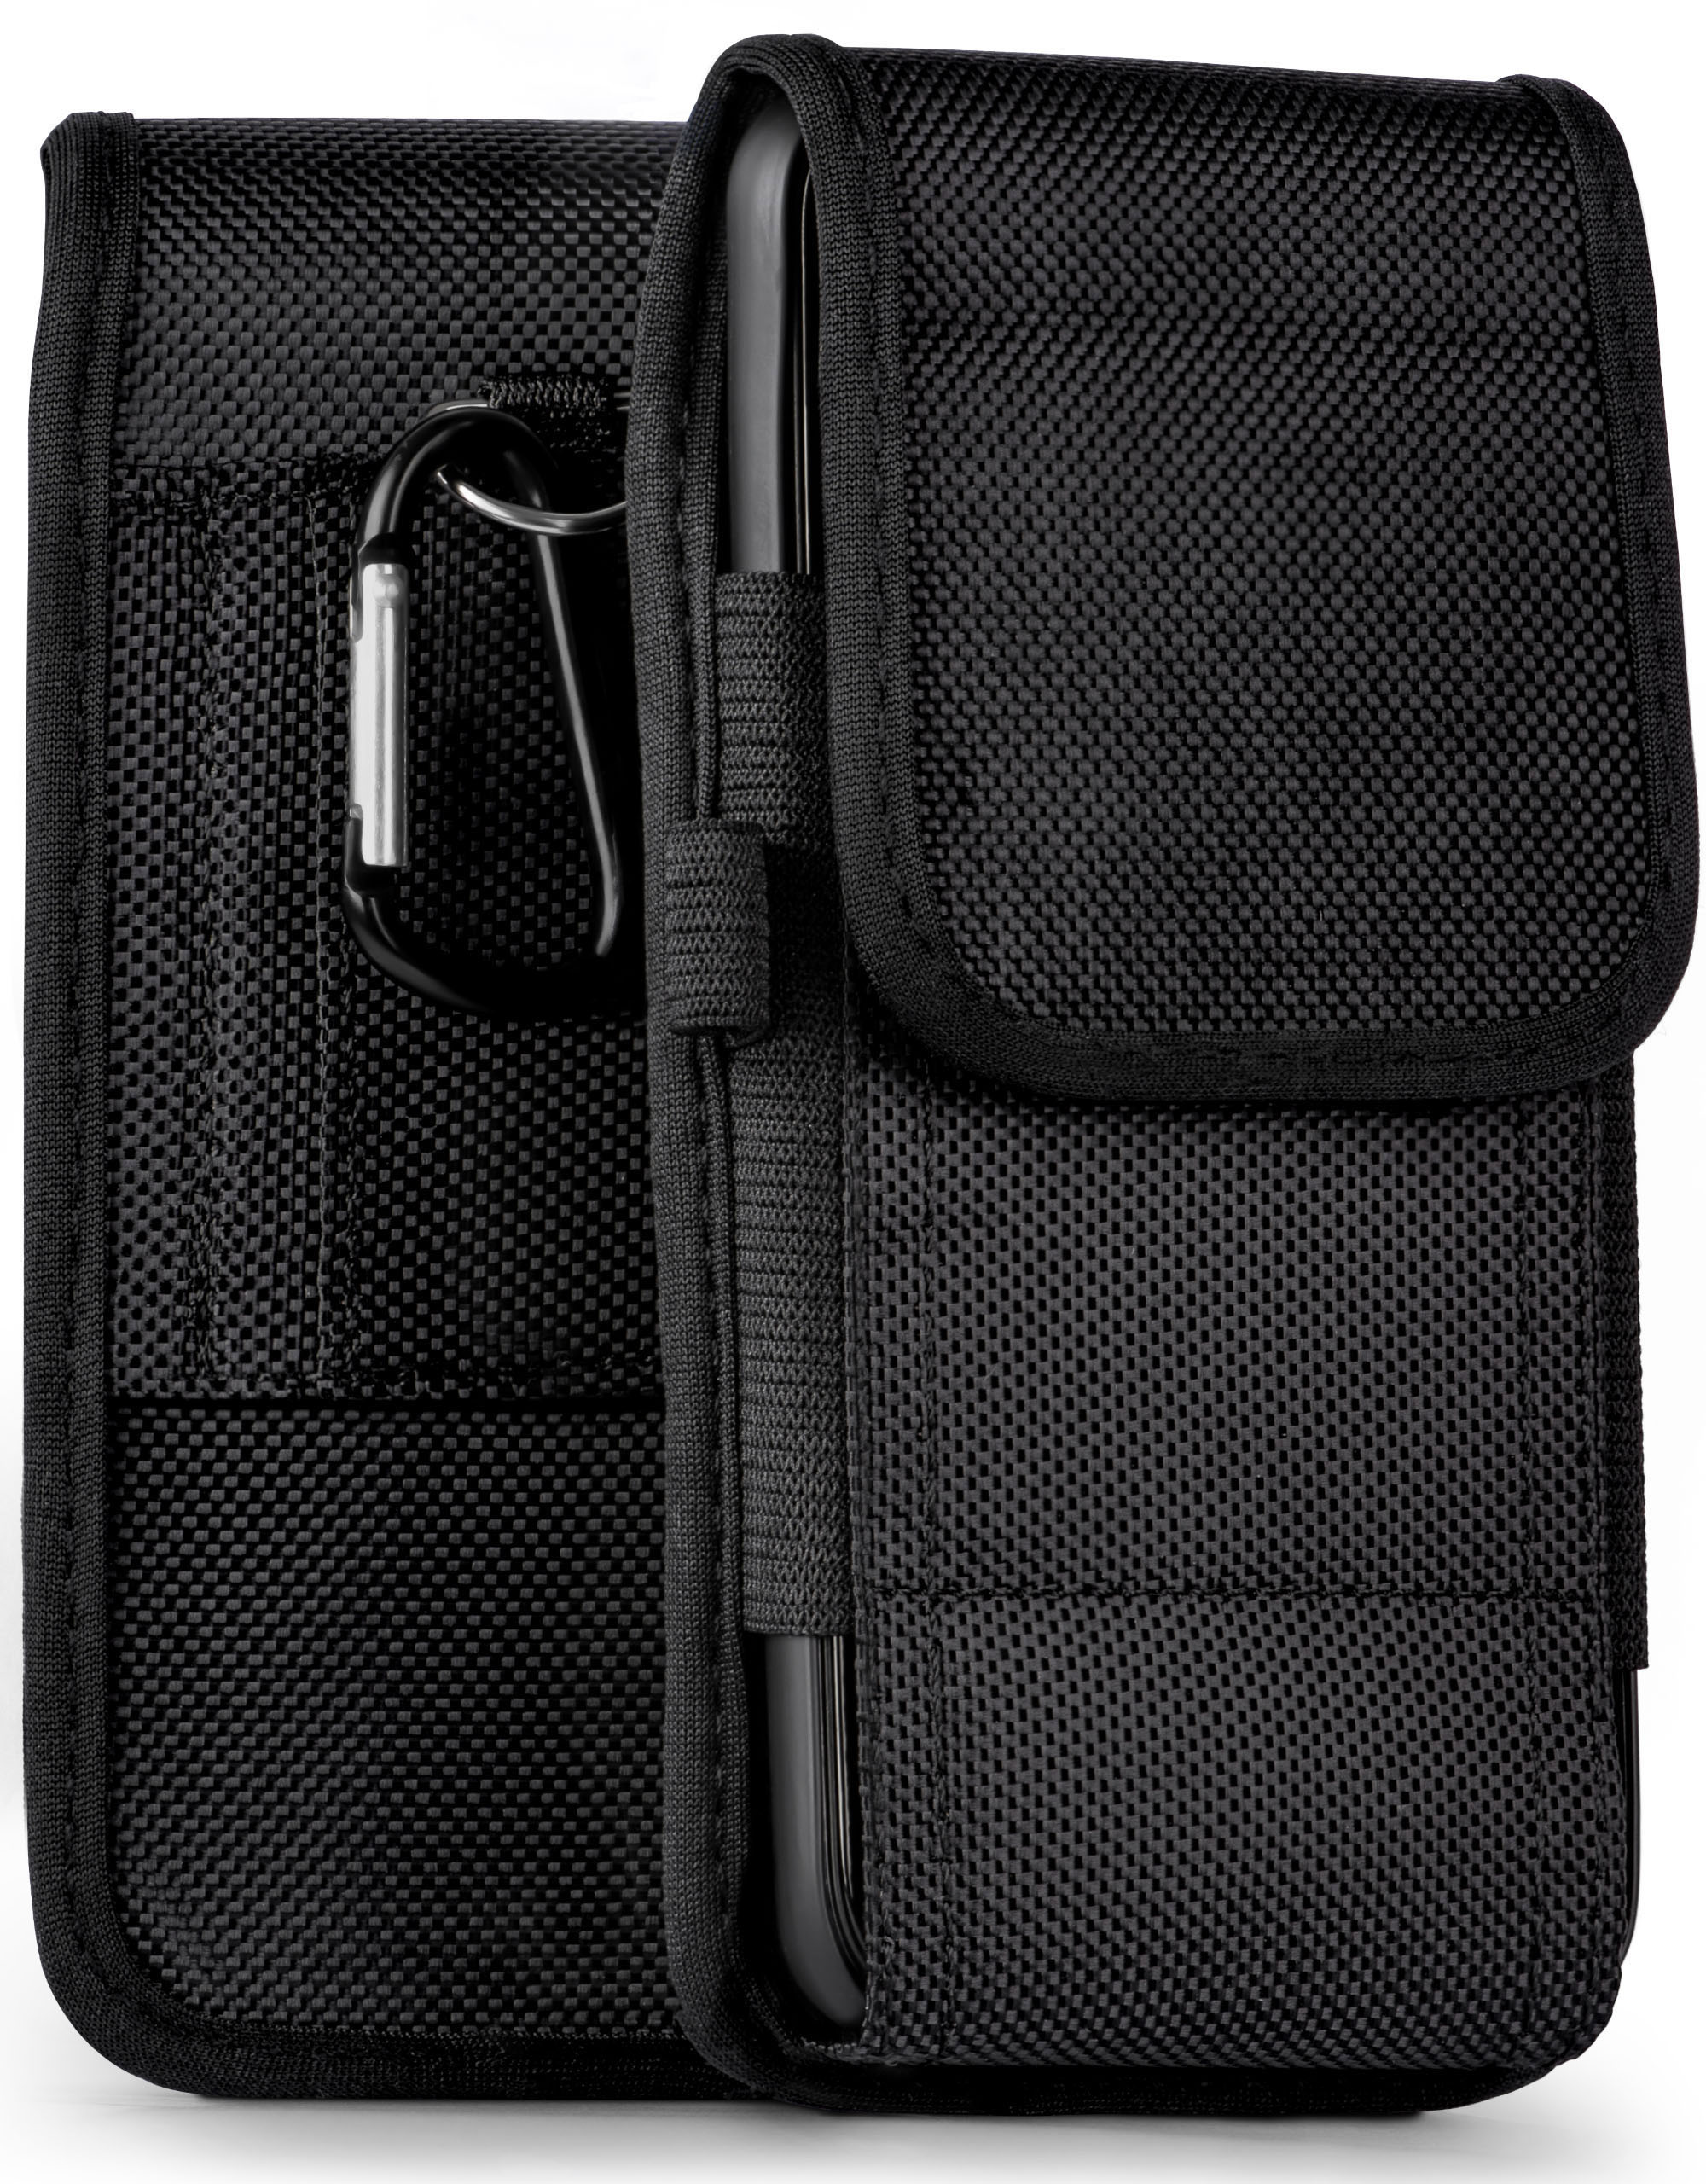 Agility Holster, Aquos Case, C10, MOEX Trail Sharp,